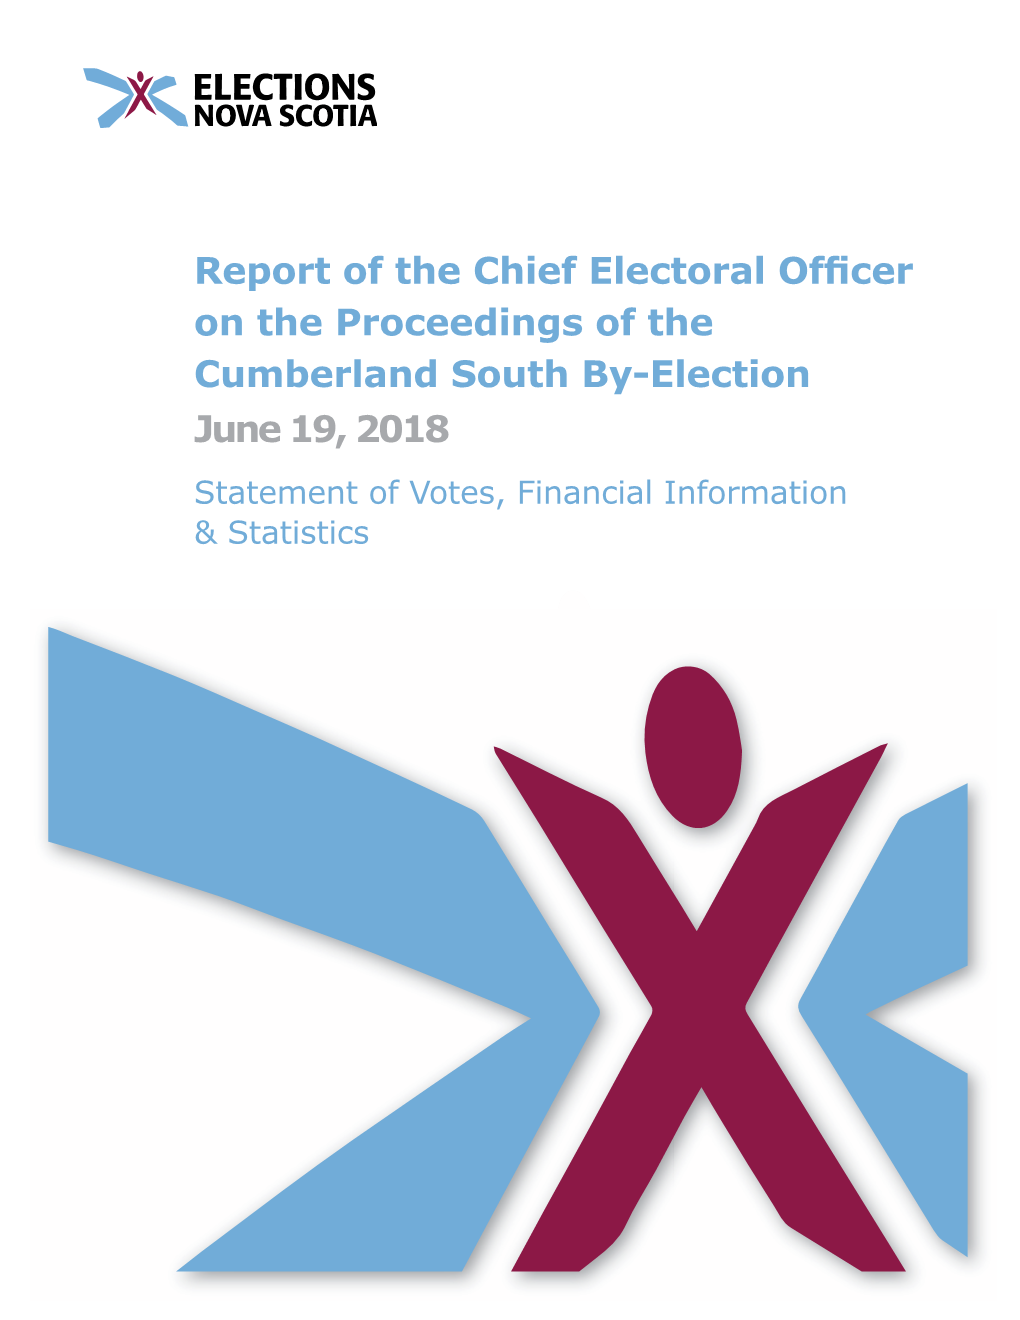 Report of the Chief Electoral Officer on the Proceedings of the Cumberland South By-Election June 19, 2018 Statement of Votes, Financial Information & Statistics